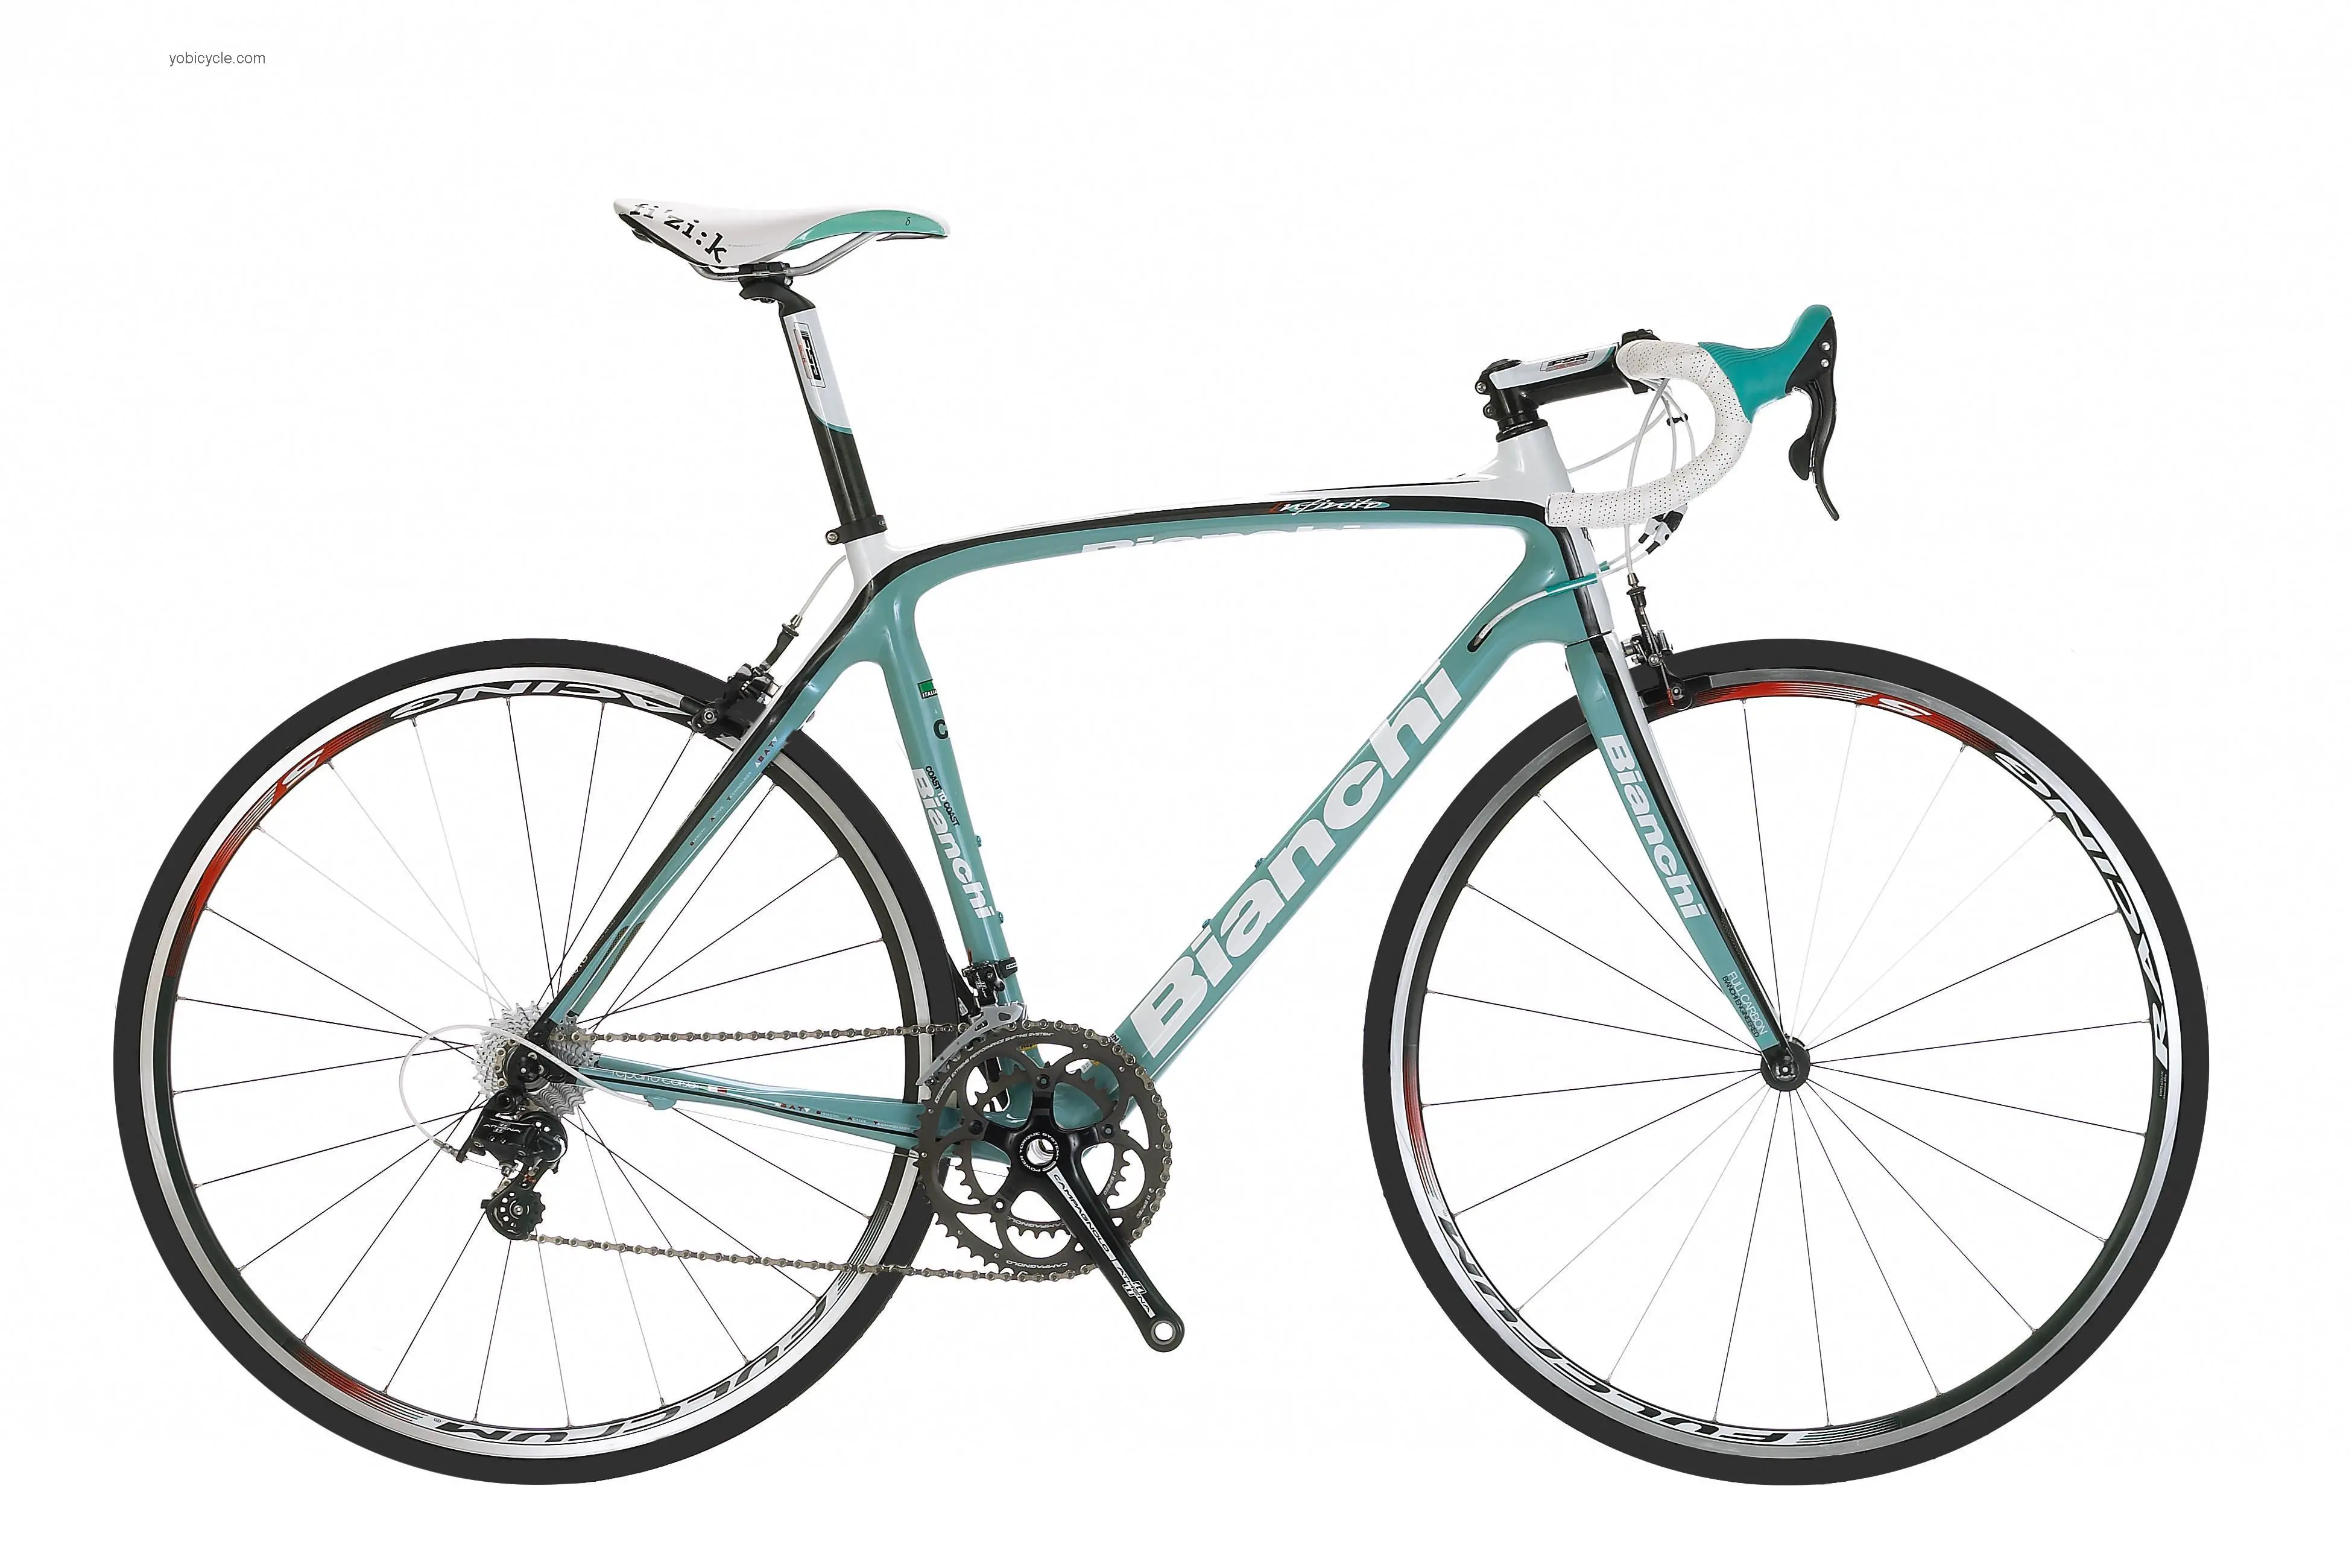 Bianchi Infinito Athena competitors and comparison tool online specs and performance